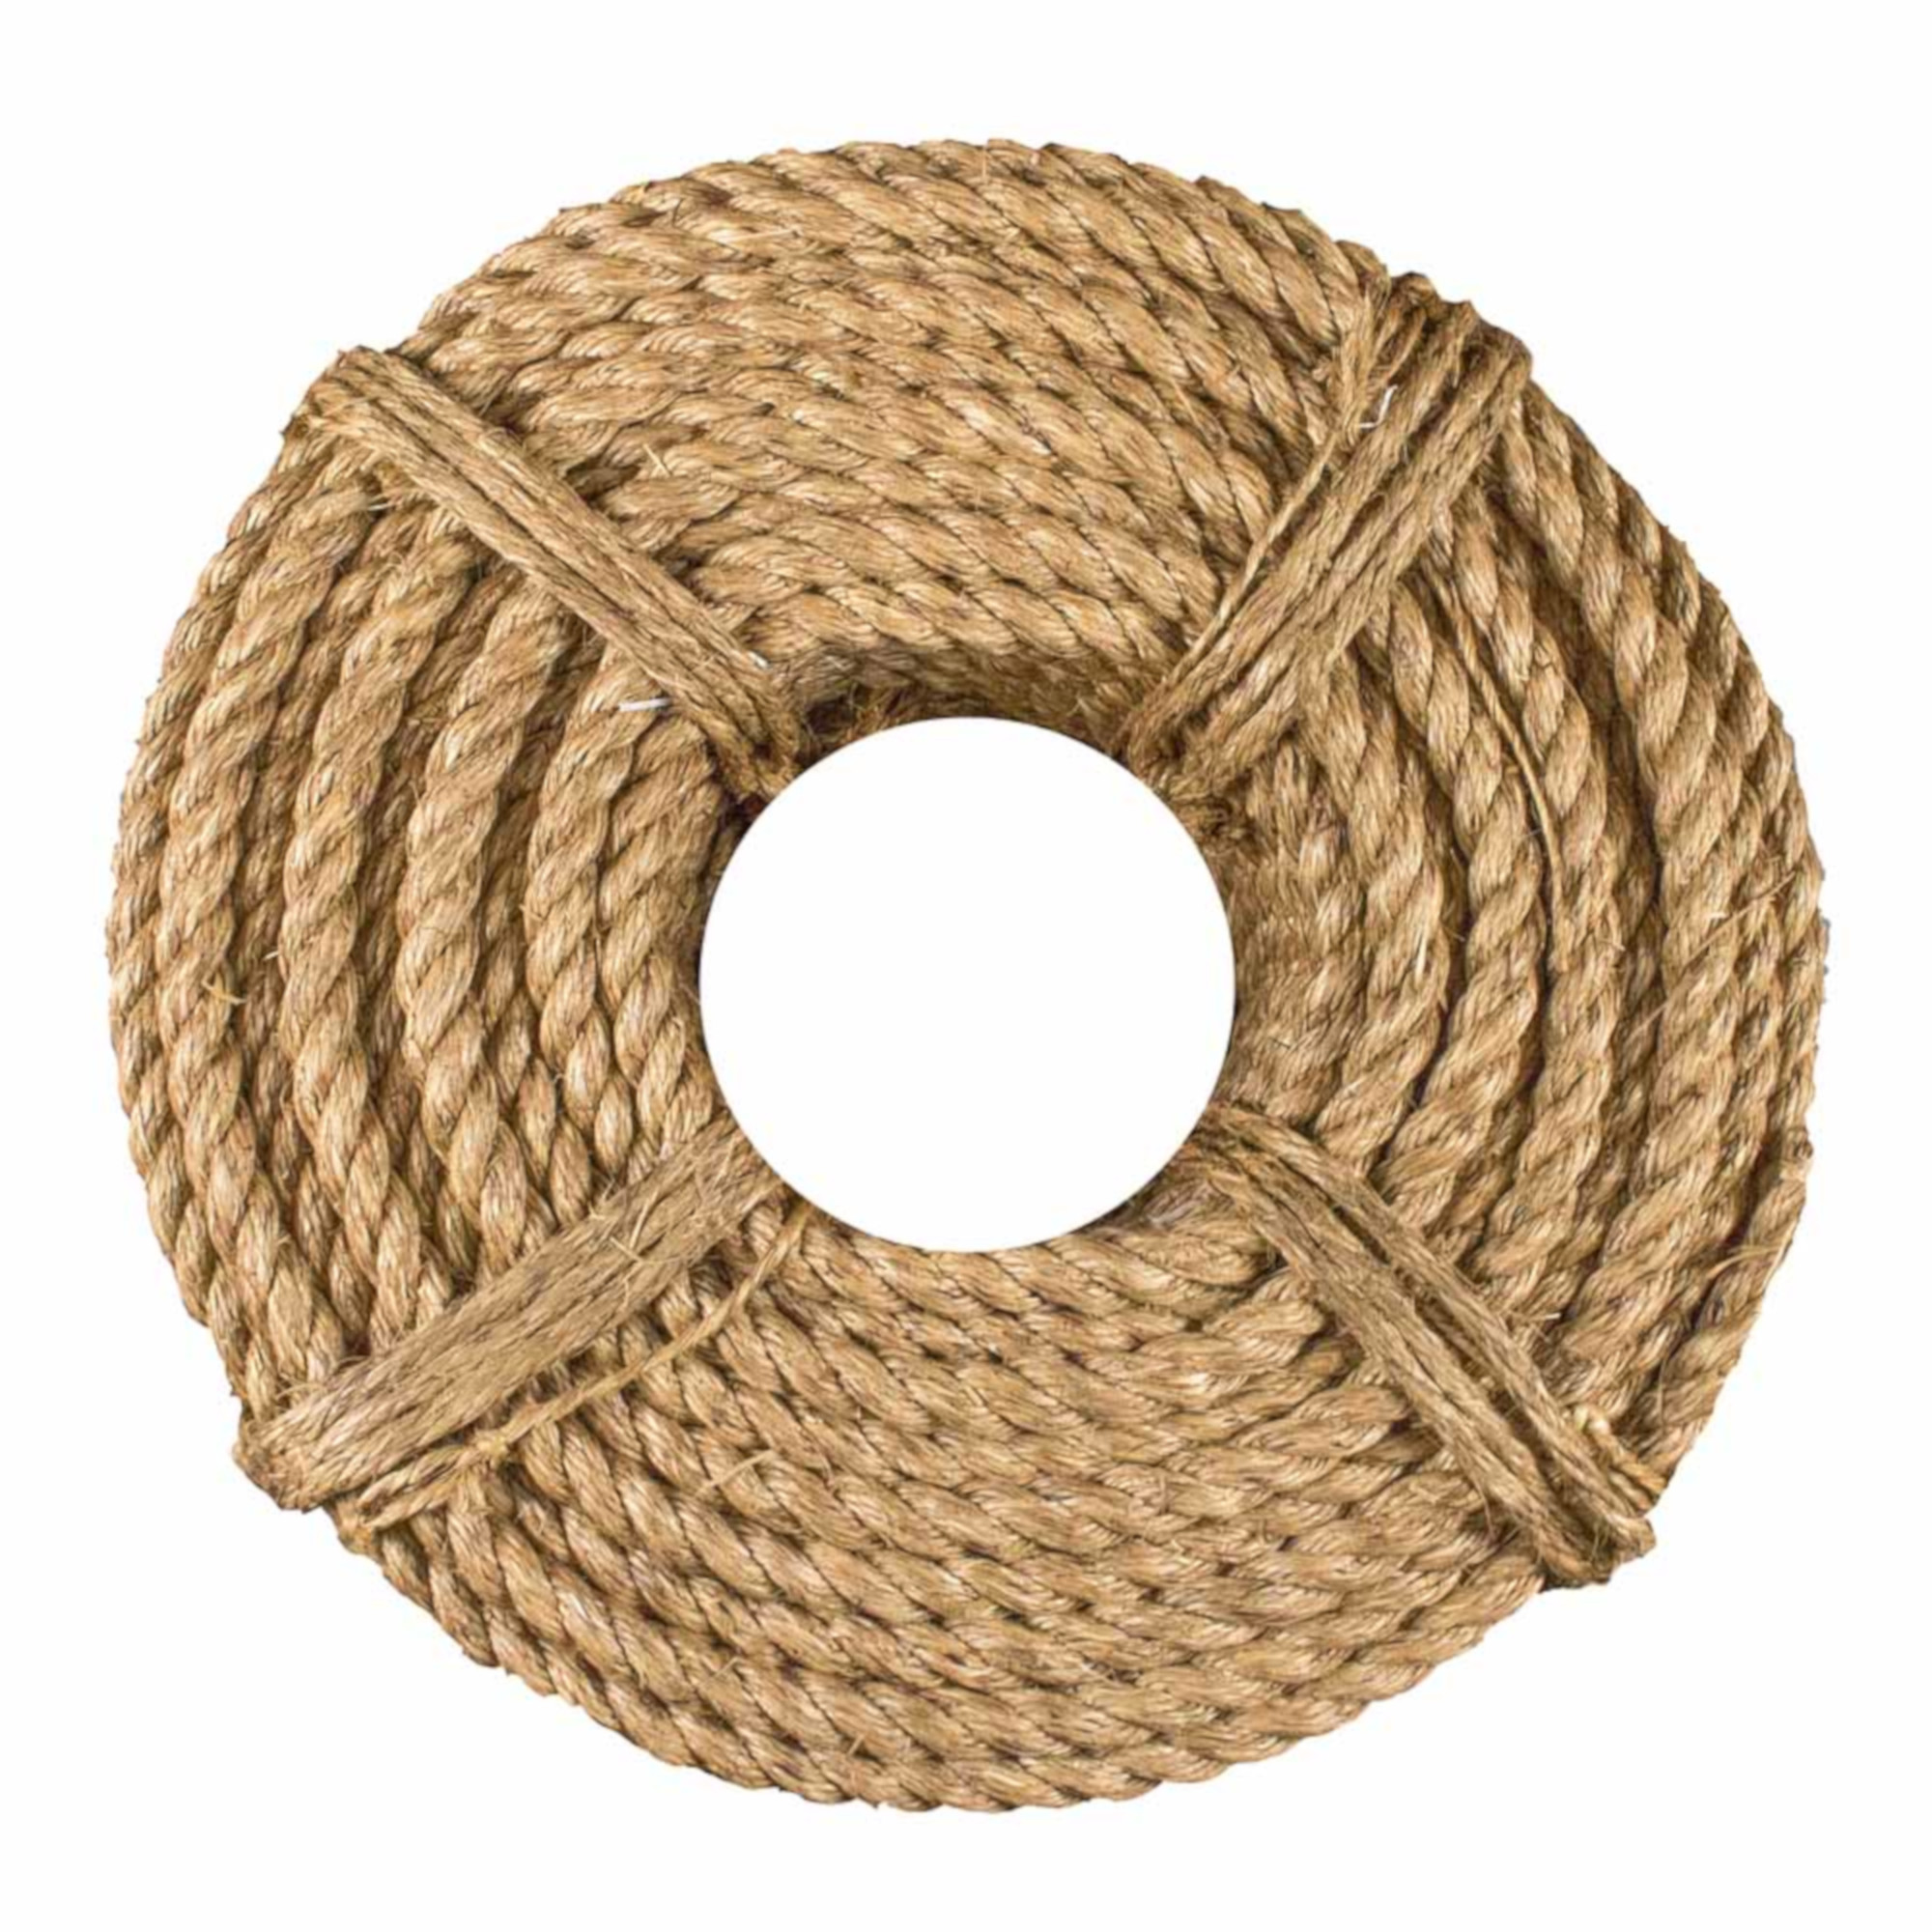 GOLBERG Manila Rope - Heavy Duty 3 Strand Natural Fiber - 1/4 inch, 5/16 inch, 3/8 inch, 1/2 inch, 5/8 inch, 3/4 inch, 1 inch, 2 inch - Available in Different Lengths - image 4 of 5